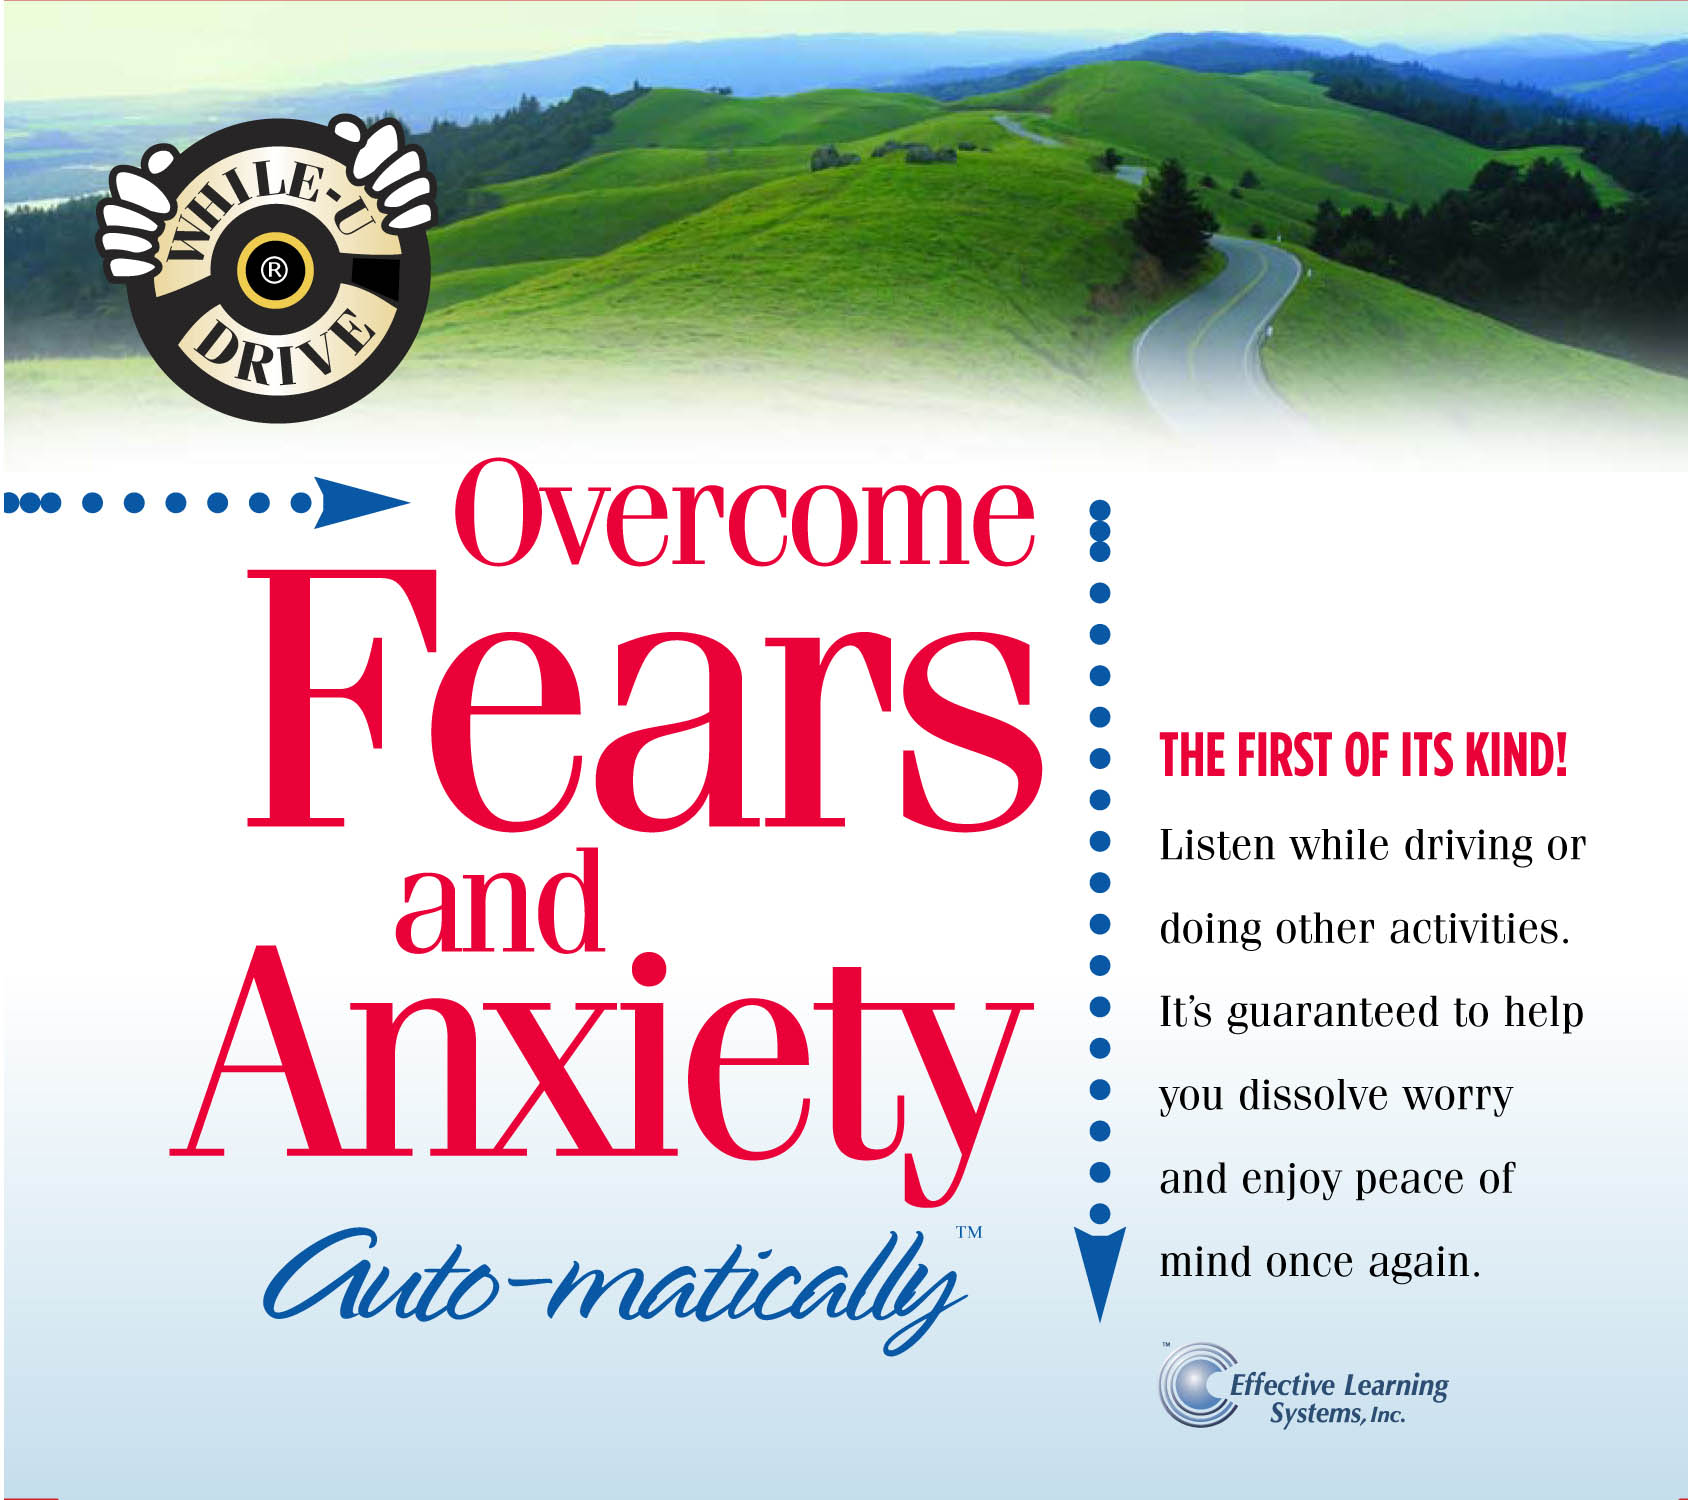 Overcome Fears and Anxiety